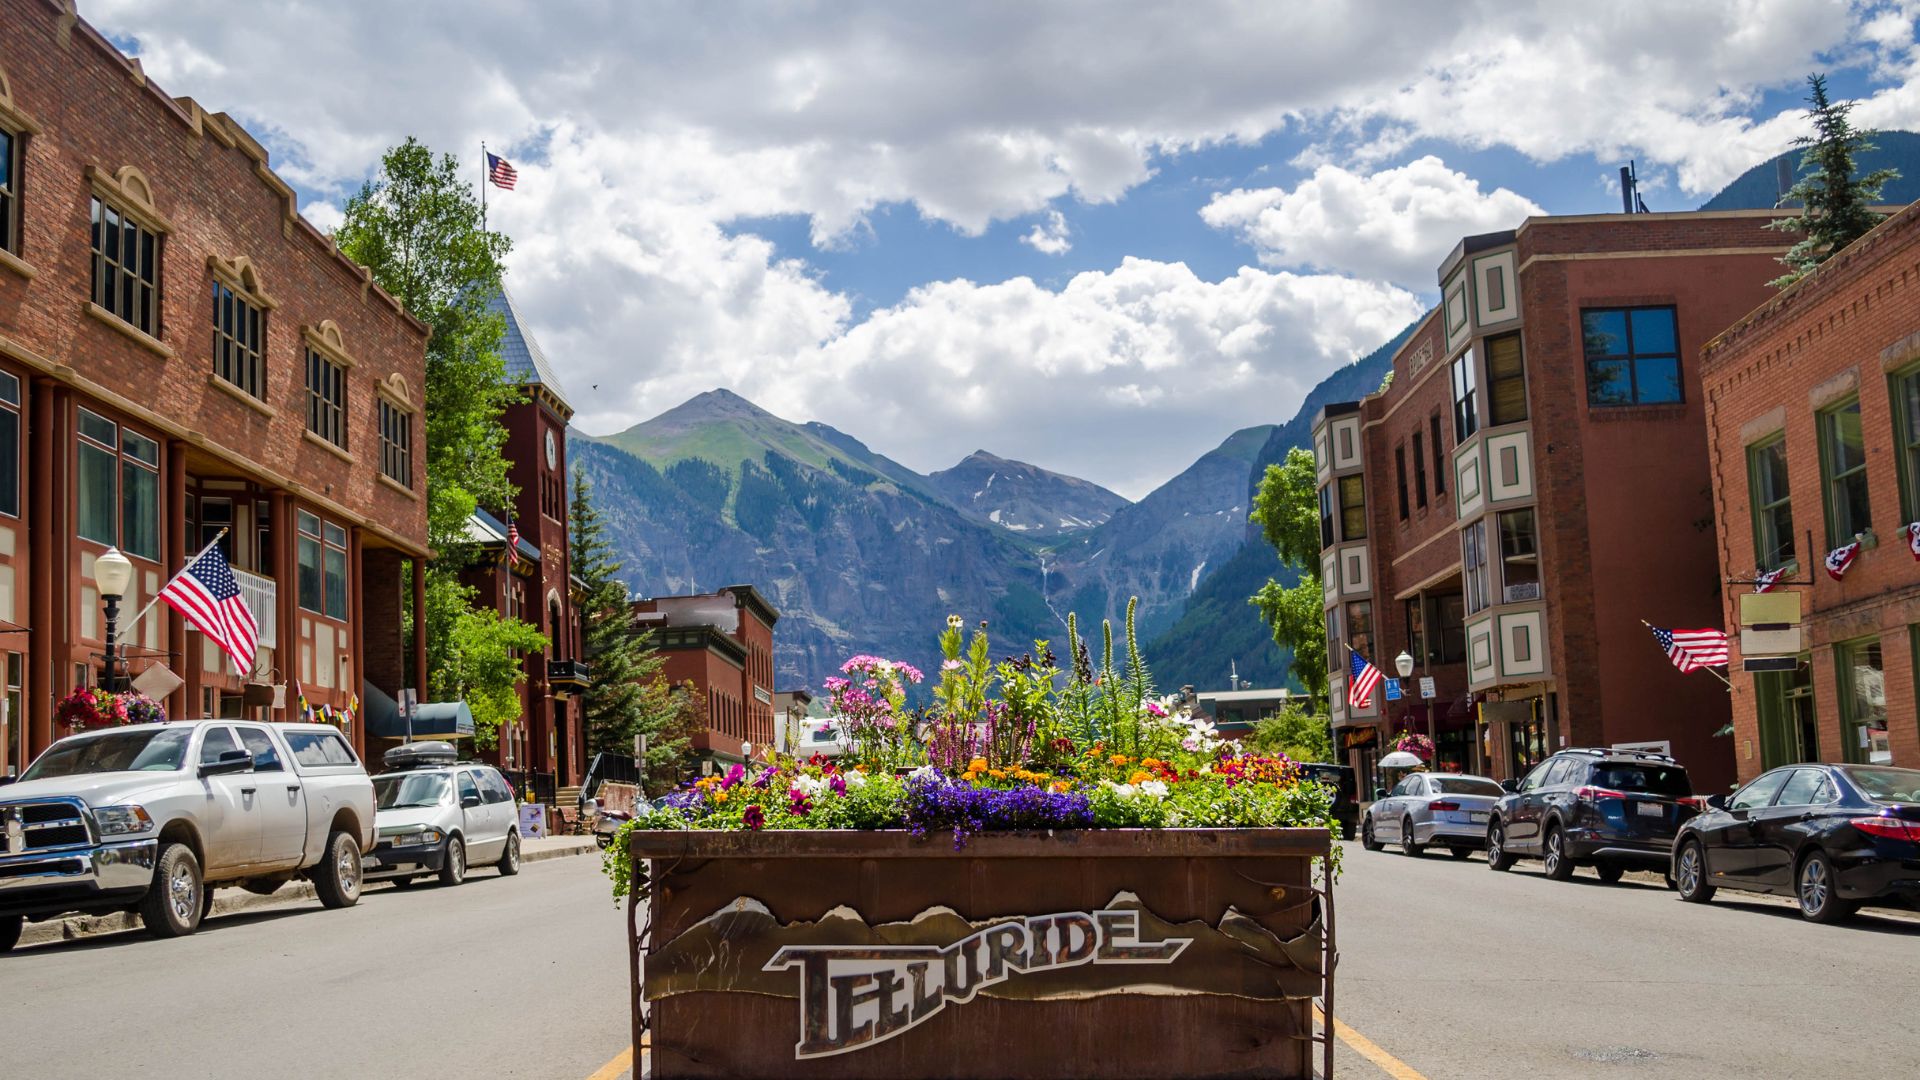 The town of Telluride's Main Street is lined with flowers and shops as it leads toward the mountains